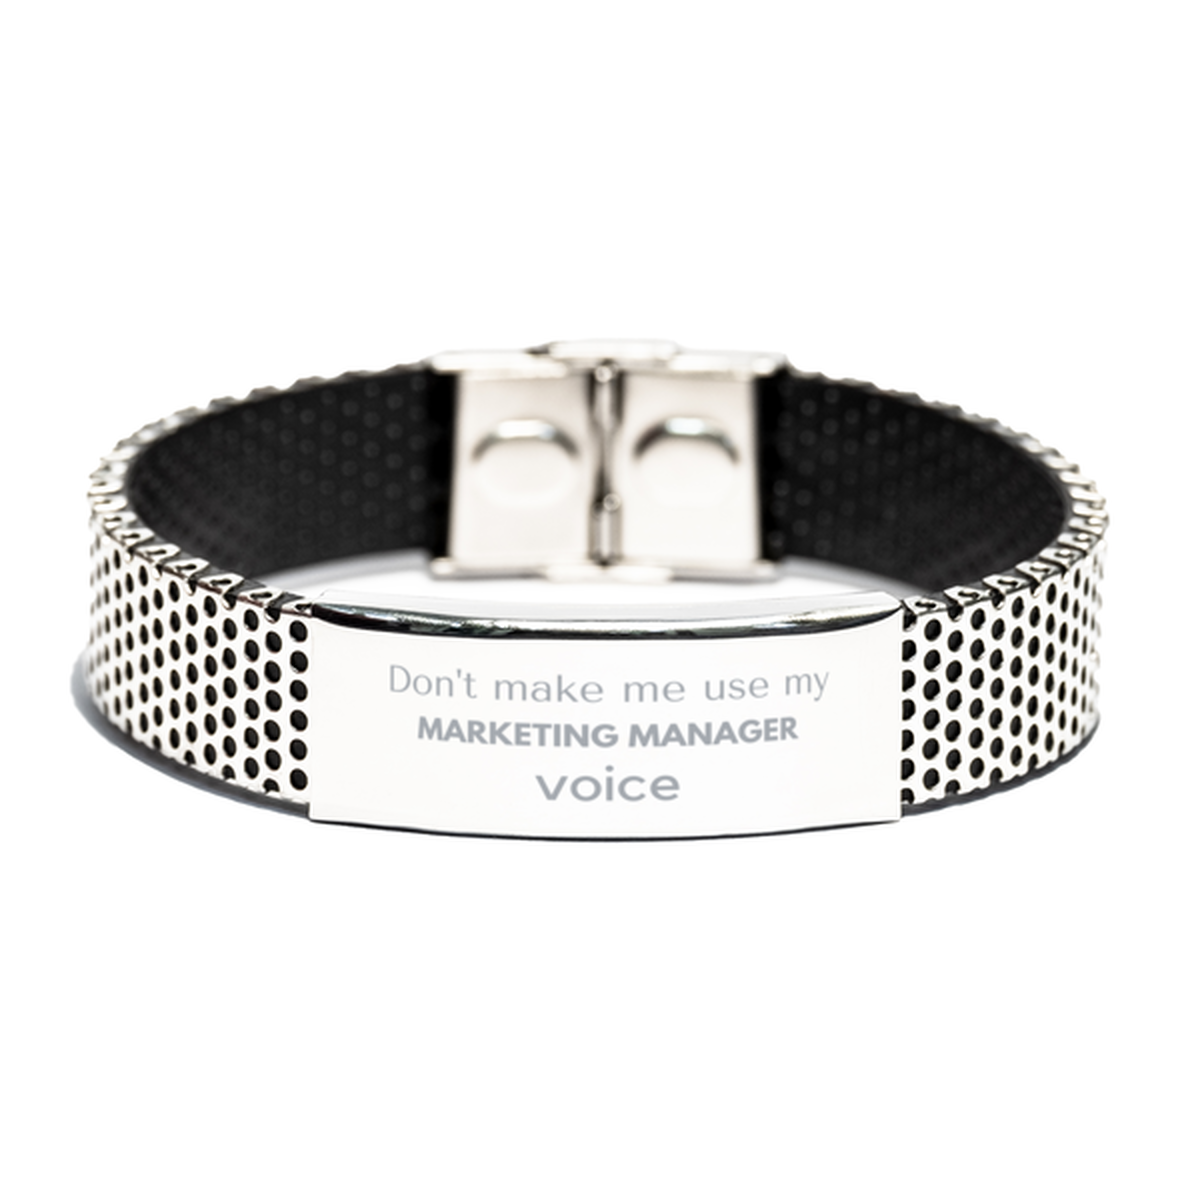 Don't make me use my Marketing Manager voice, Sarcasm Marketing Manager Gifts, Christmas Marketing Manager Stainless Steel Bracelet Birthday Unique Gifts For Marketing Manager Coworkers, Men, Women, Colleague, Friends